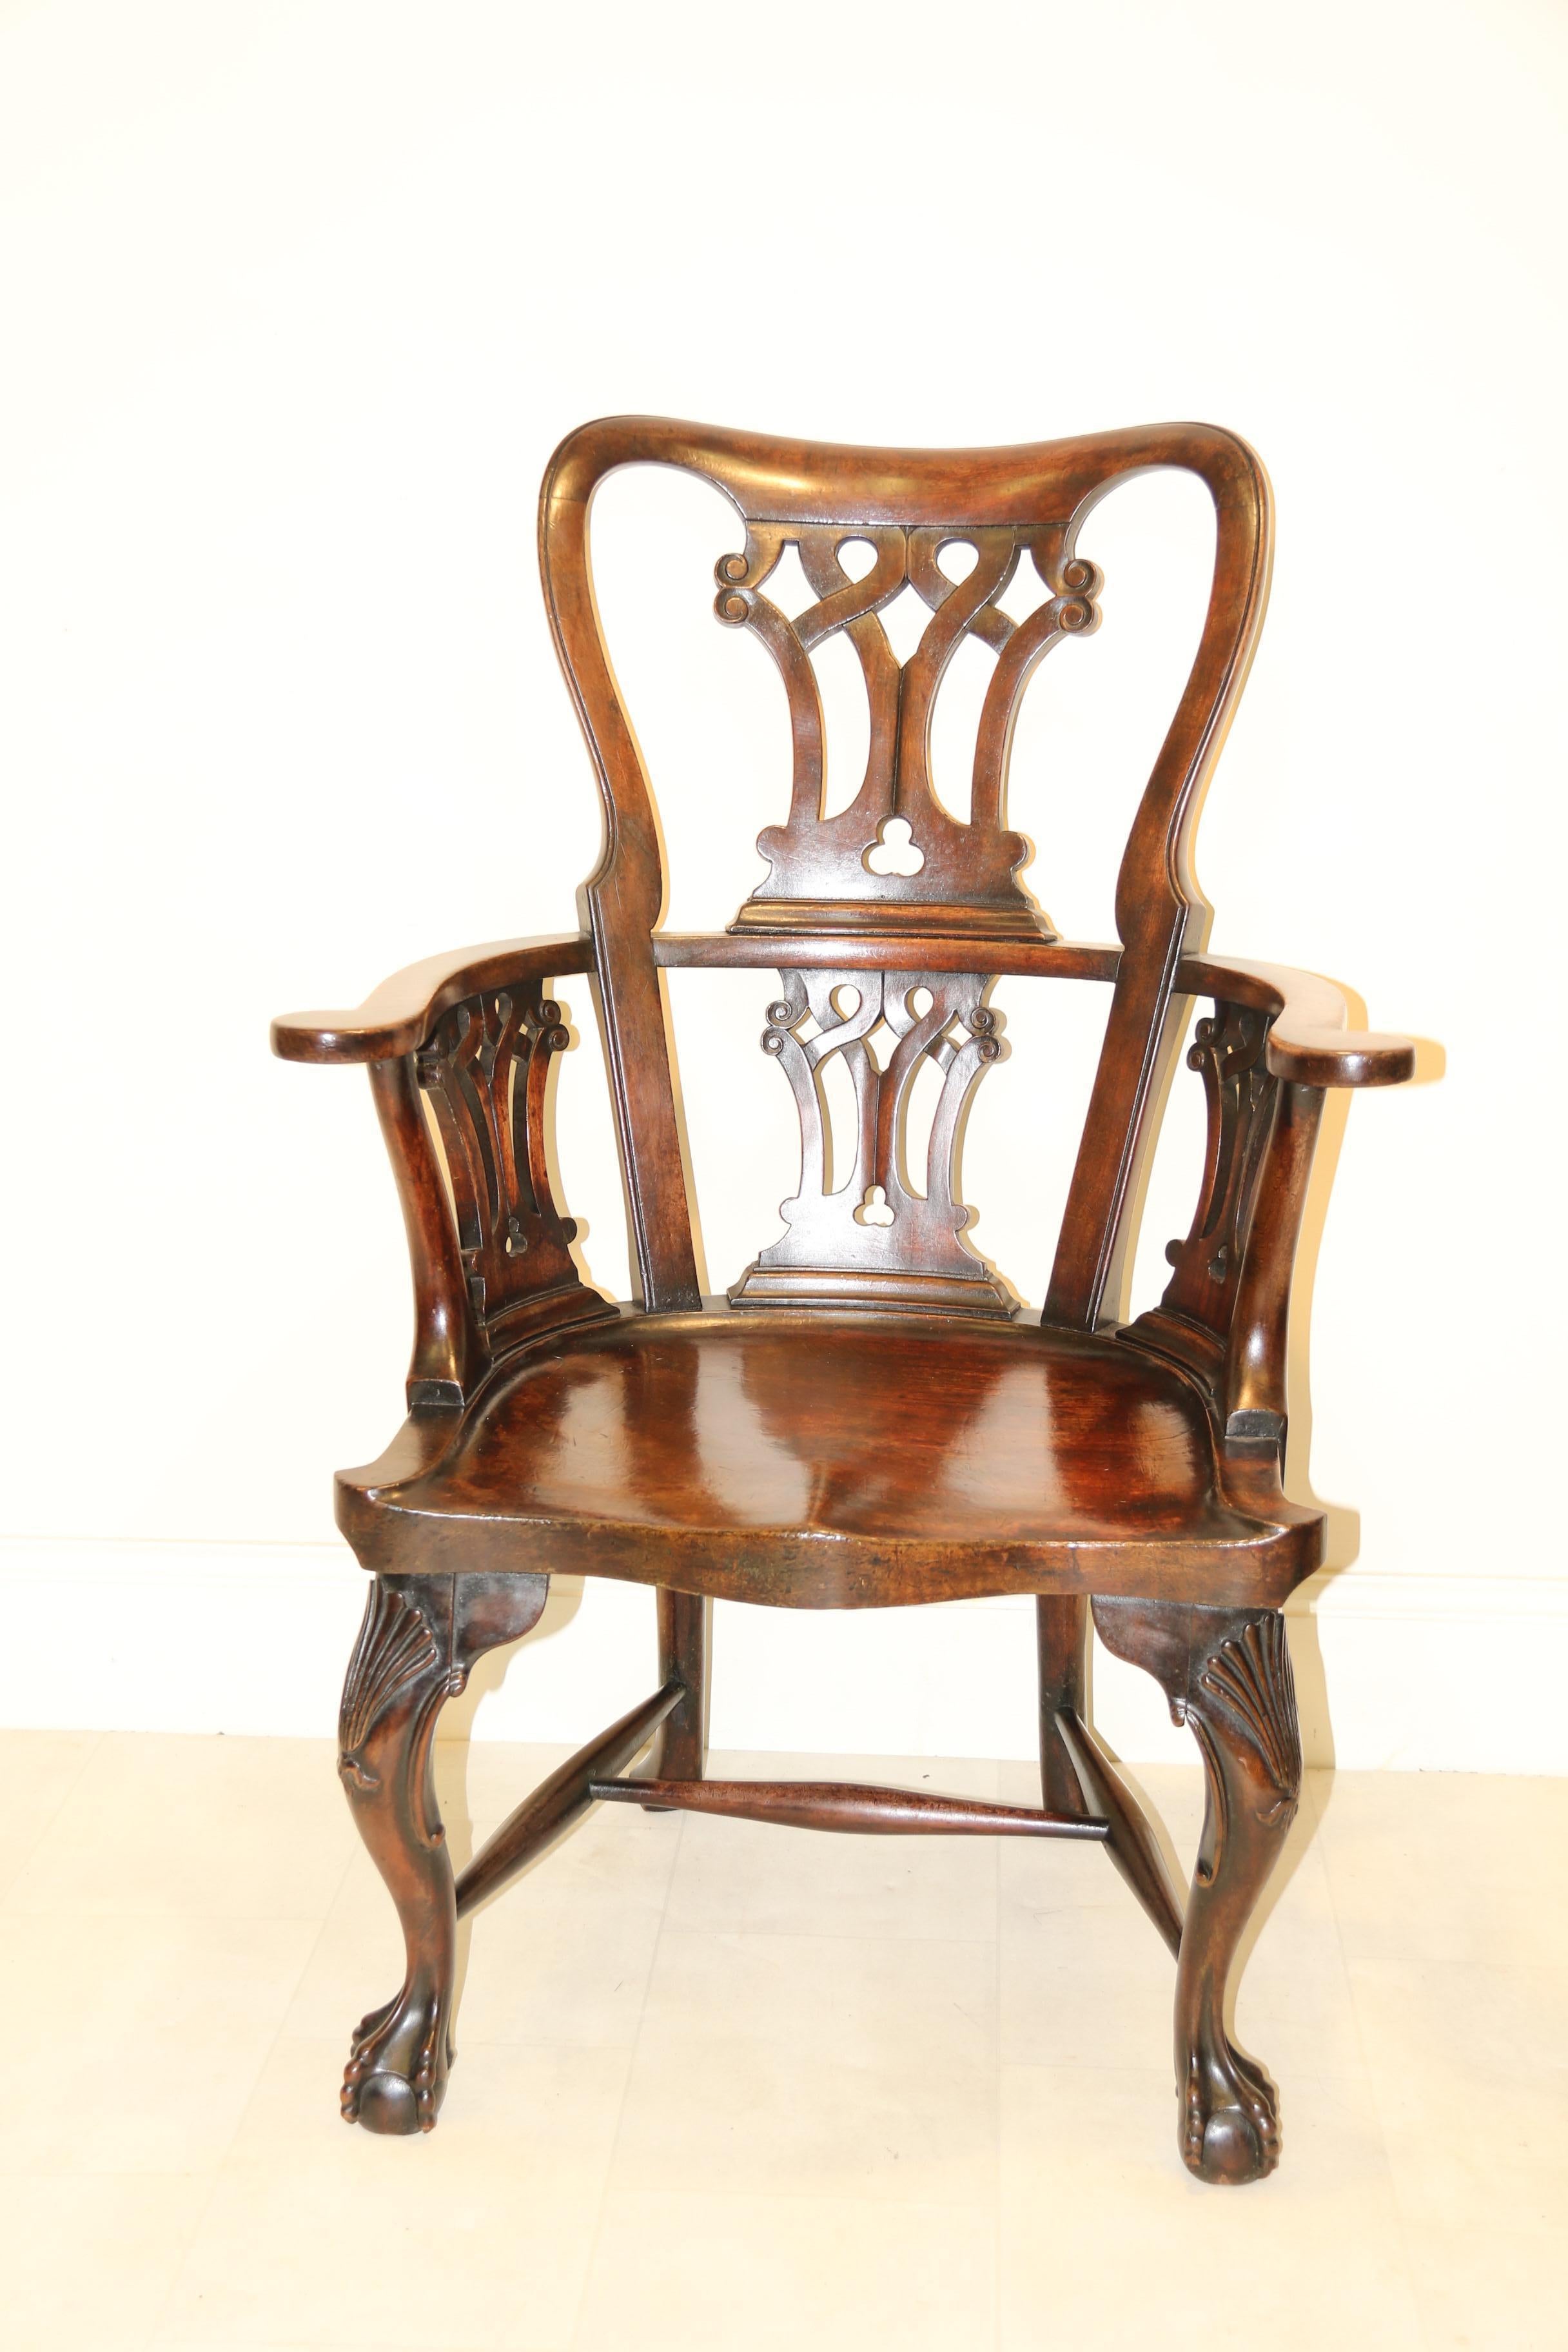 Antique English George II Period Mahogany Windsor Armchair, circa 1750 For Sale 8